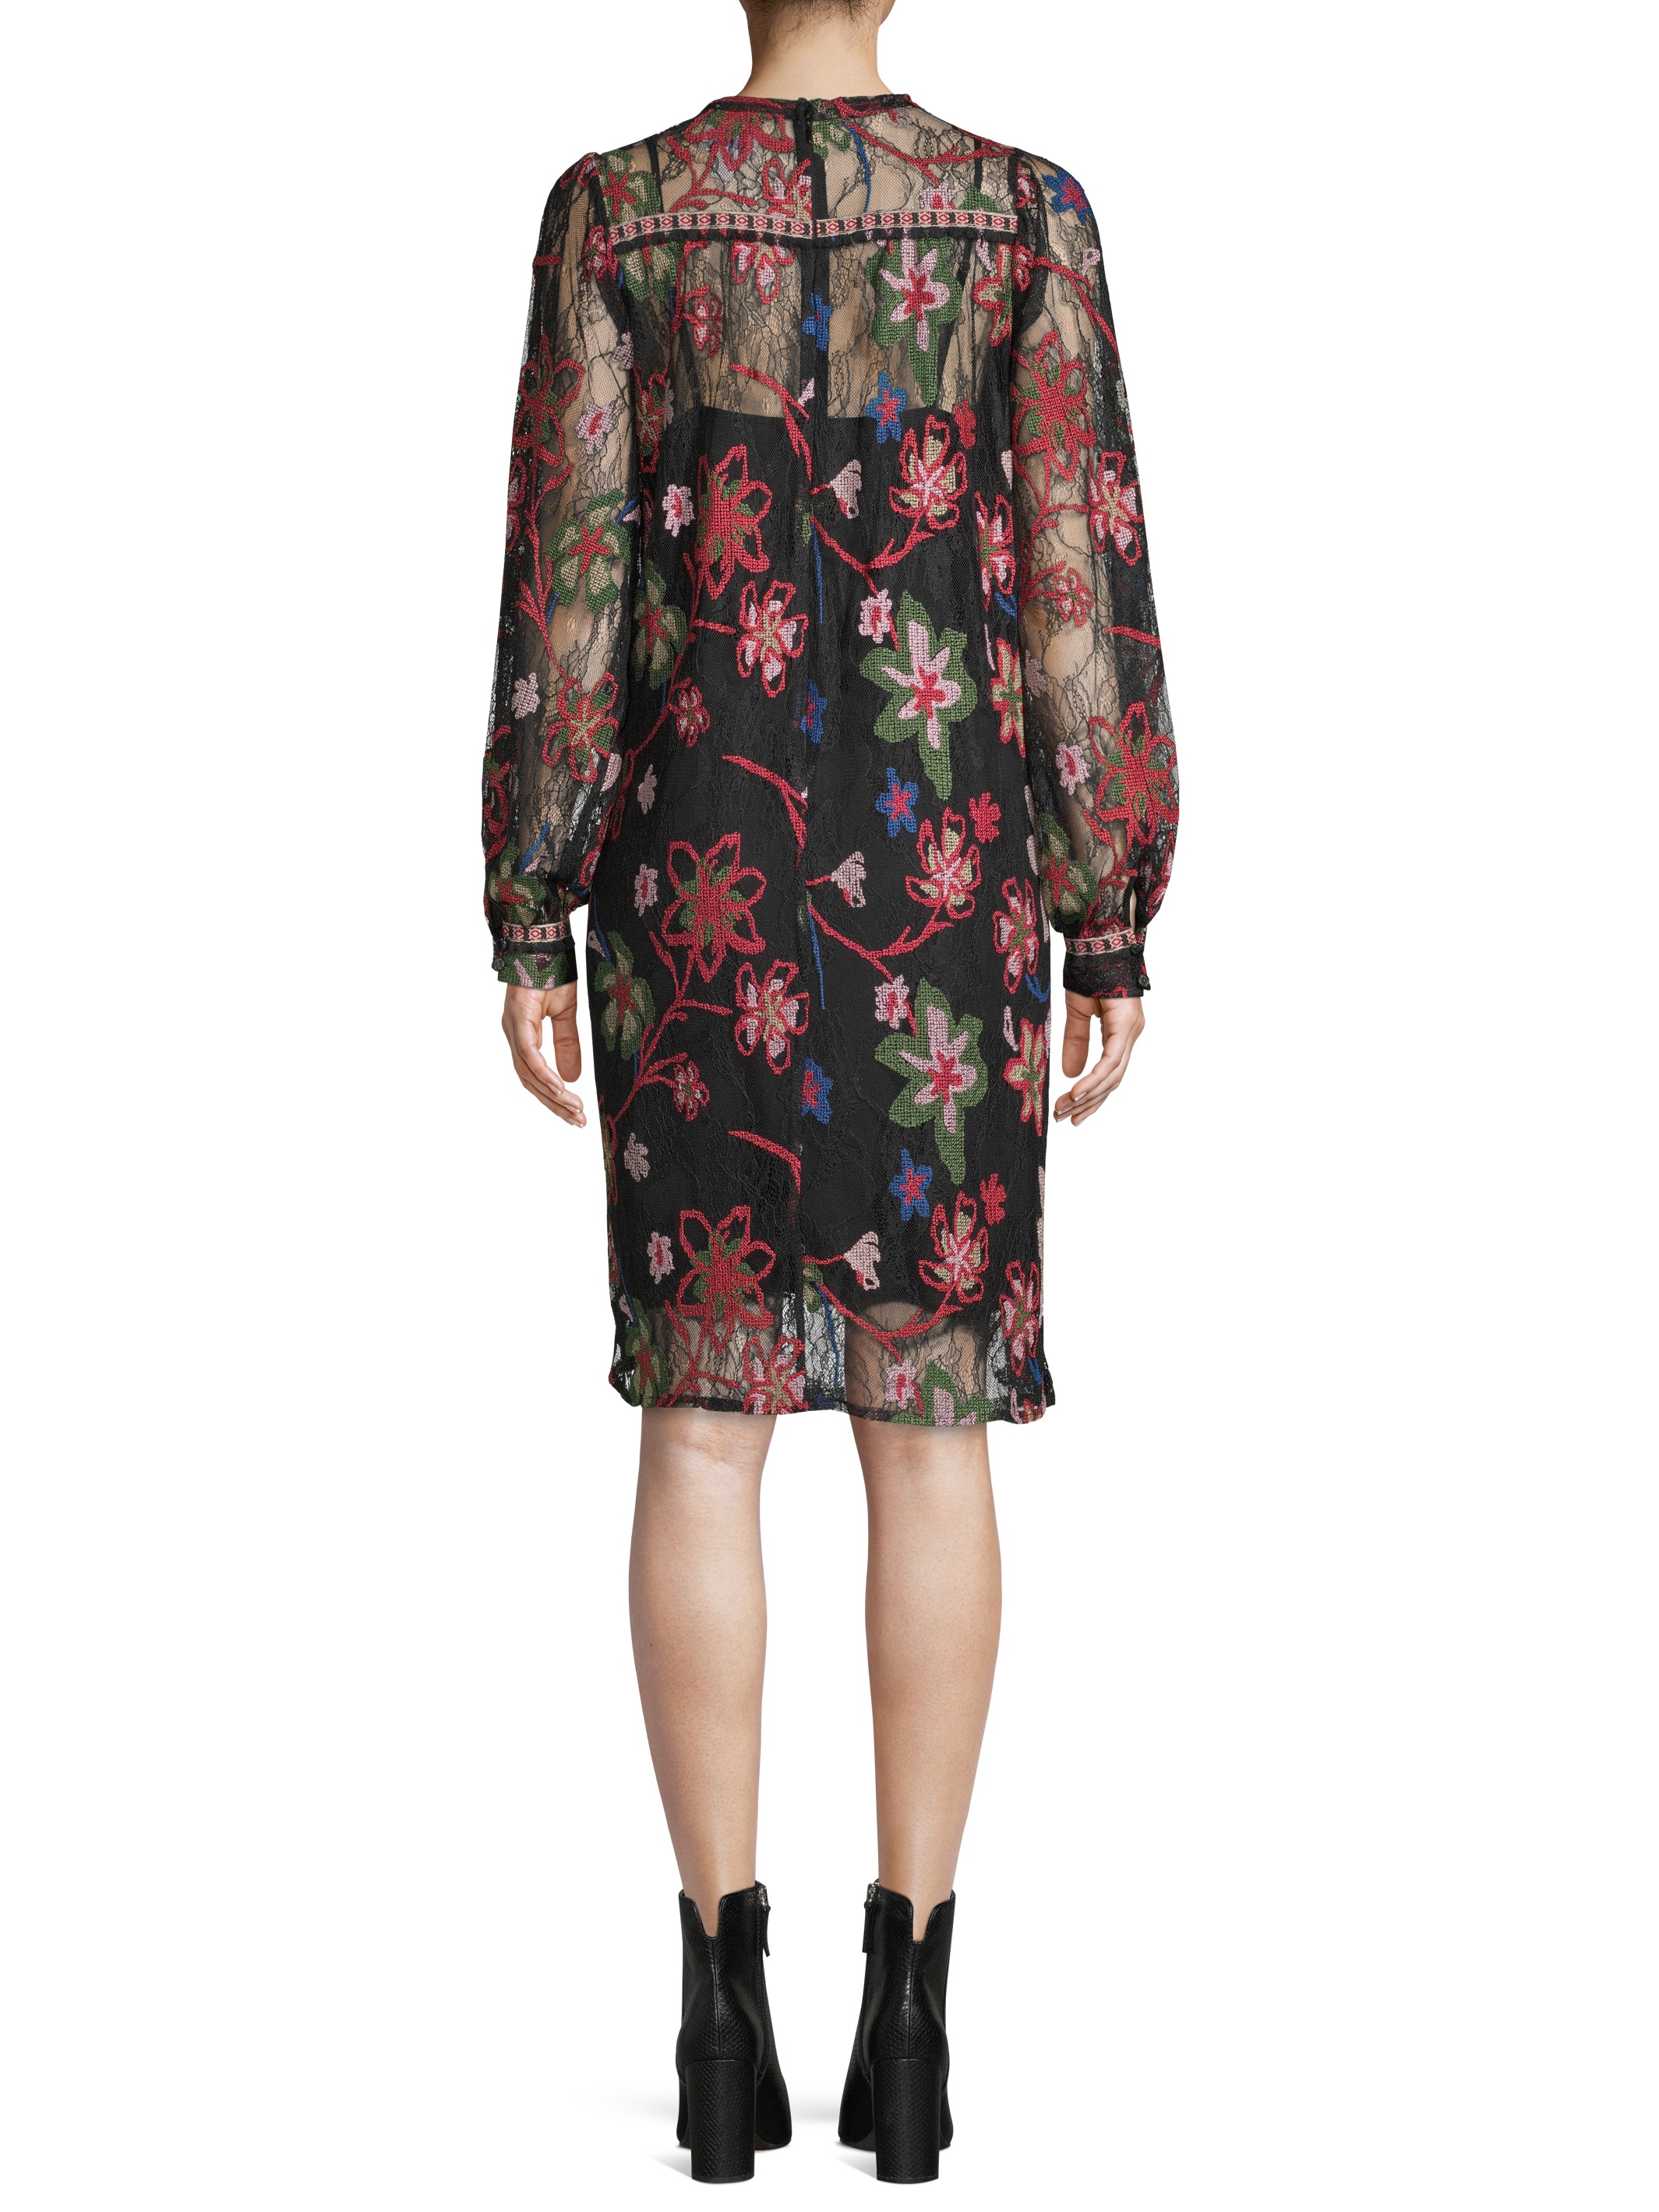 Sui by Anna Sui Women's Floral Embroidered Lace Dress - image 2 of 5